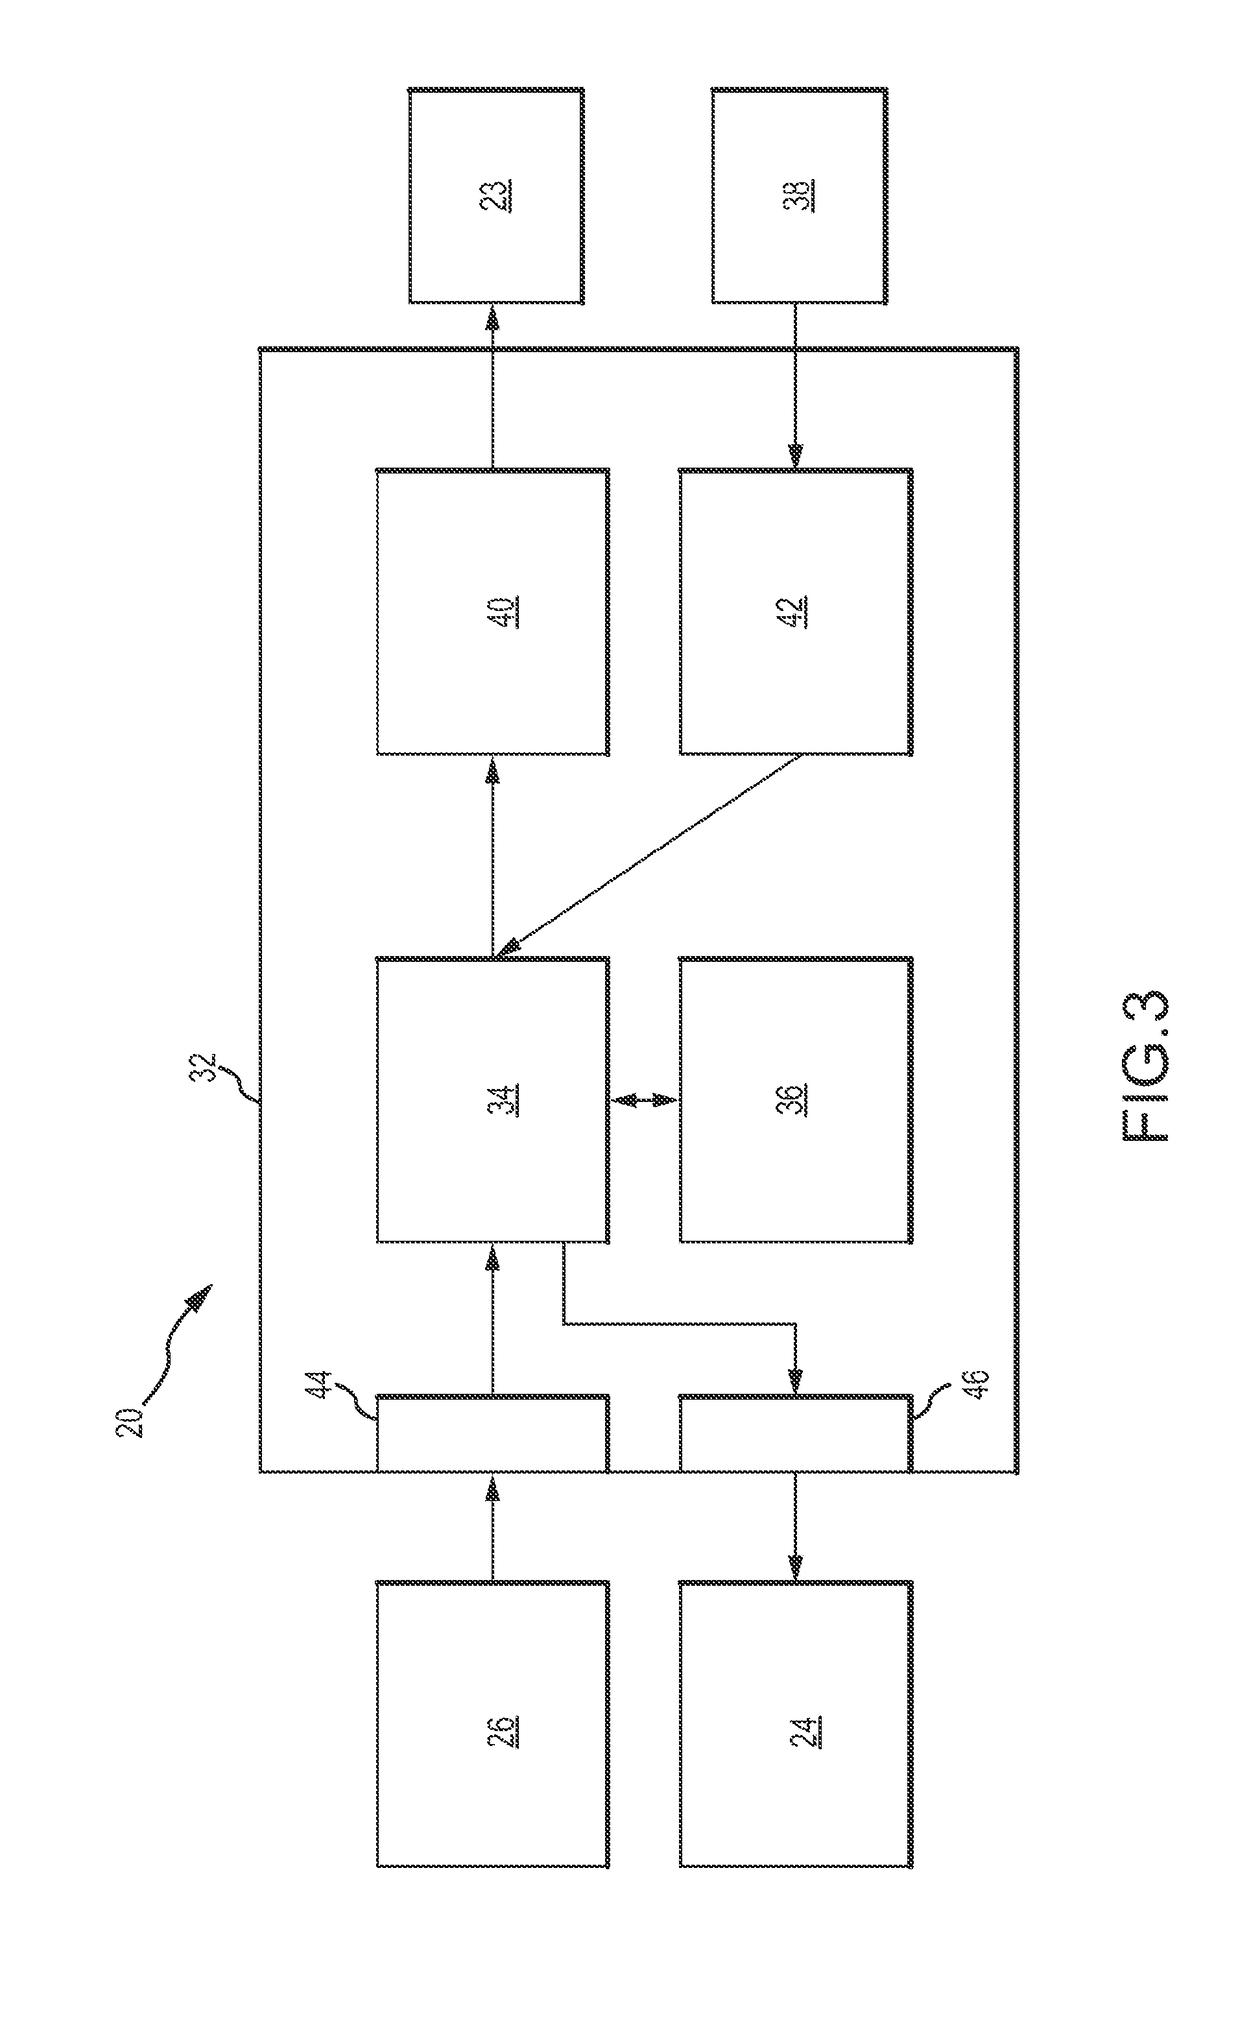 Non-contact mapping system and method